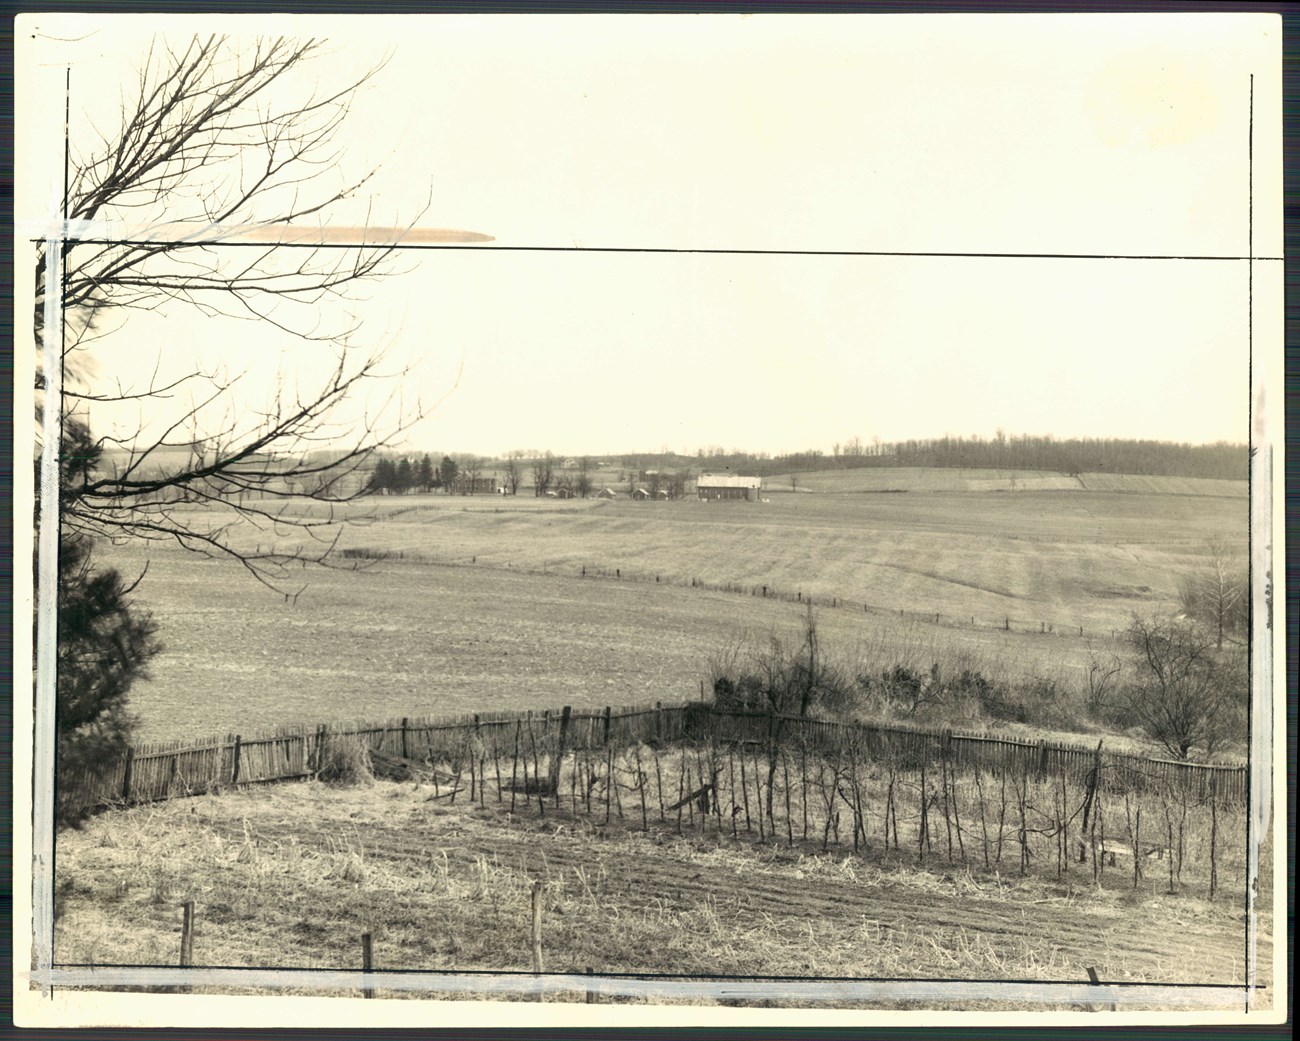 Black and white photo of open farm fields with a fenced garden in the foreground and a barn in the distance across empty fields.